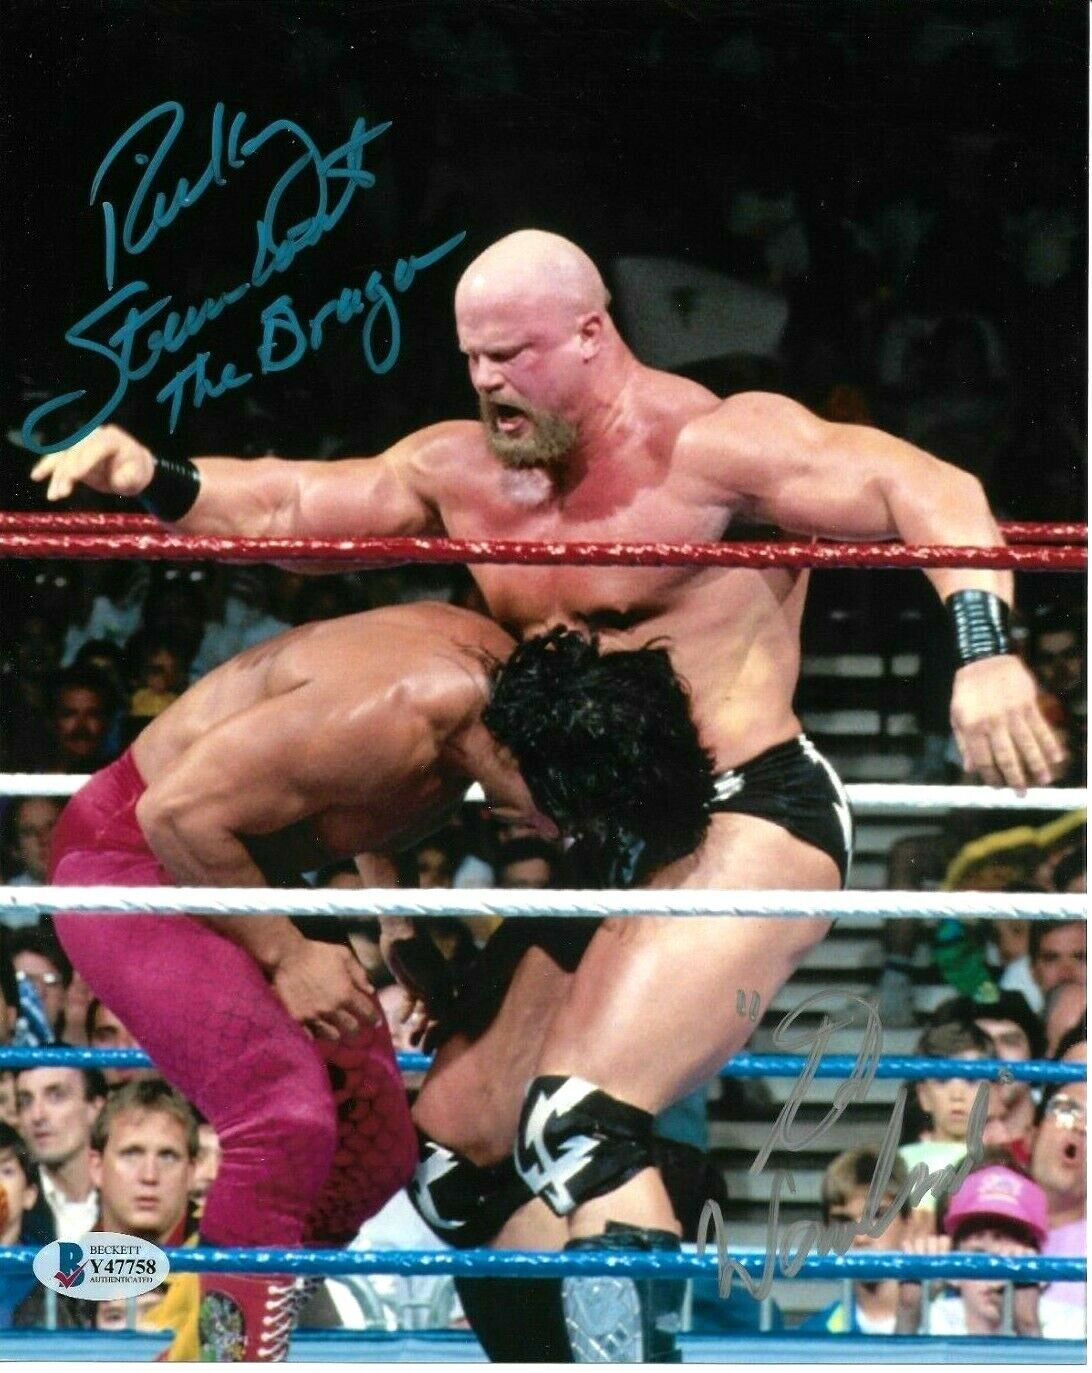 WWE RICKY STEAMBOAT WARLORD HAND SIGNED AUTOGRAPHED 8X10 Photo Poster painting WITH BECKETT COA